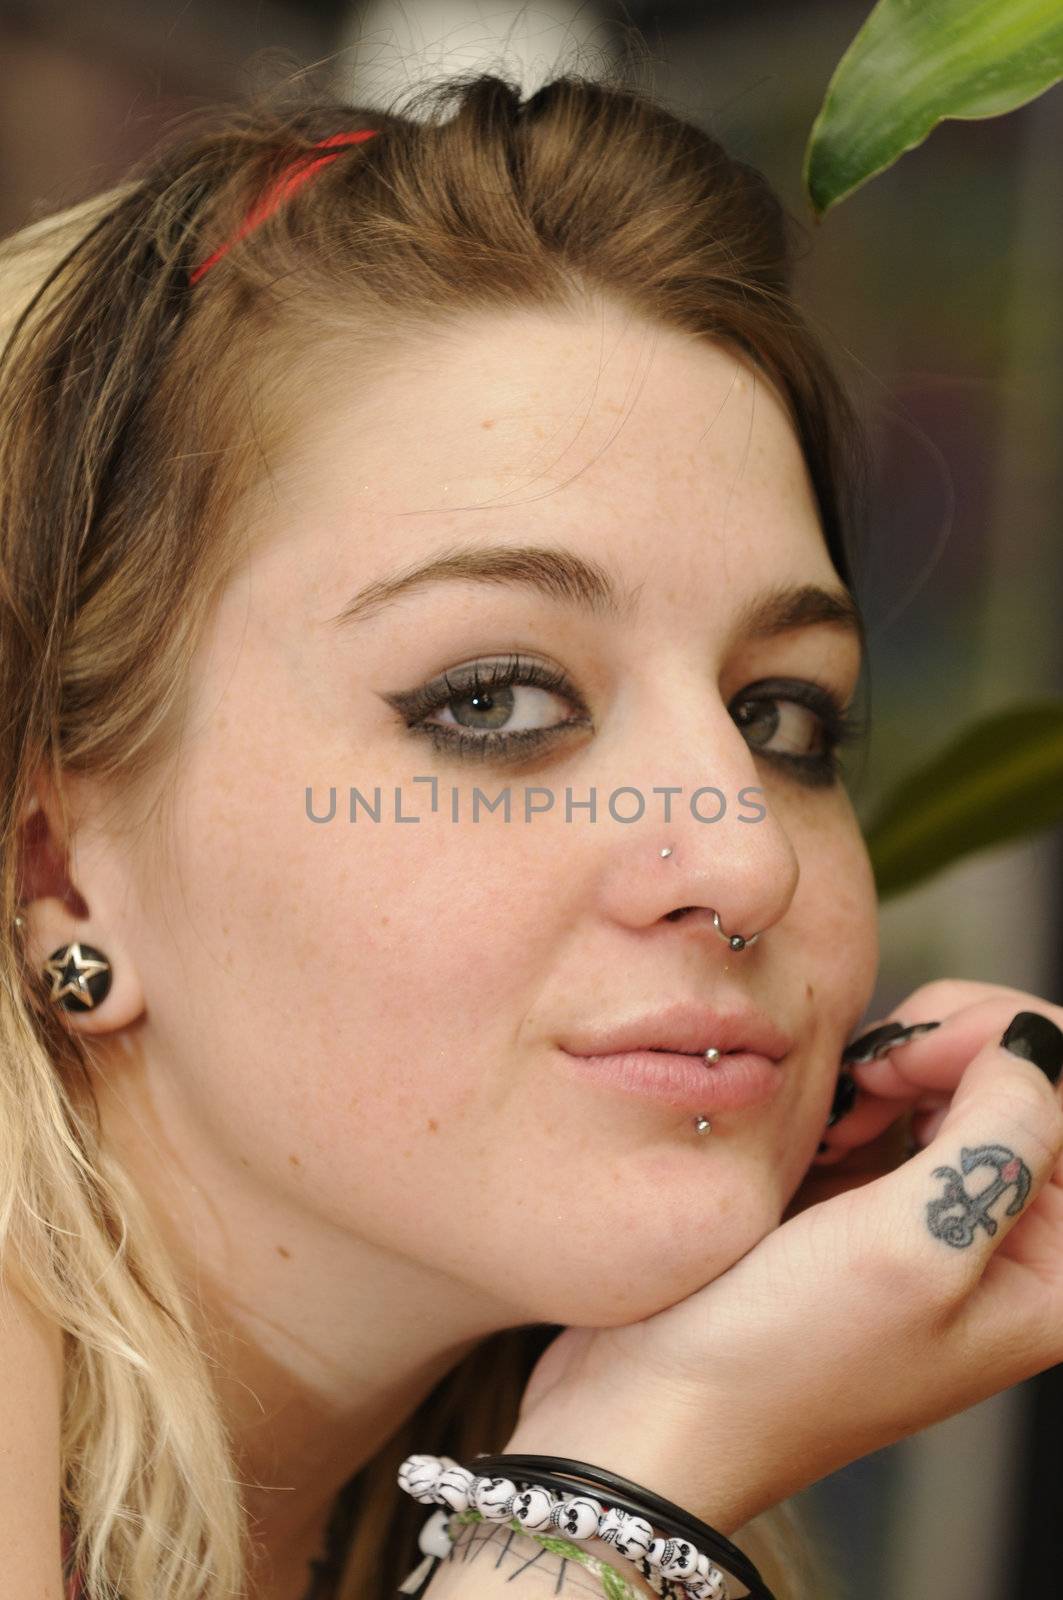 Young woman with tattoo and piercings